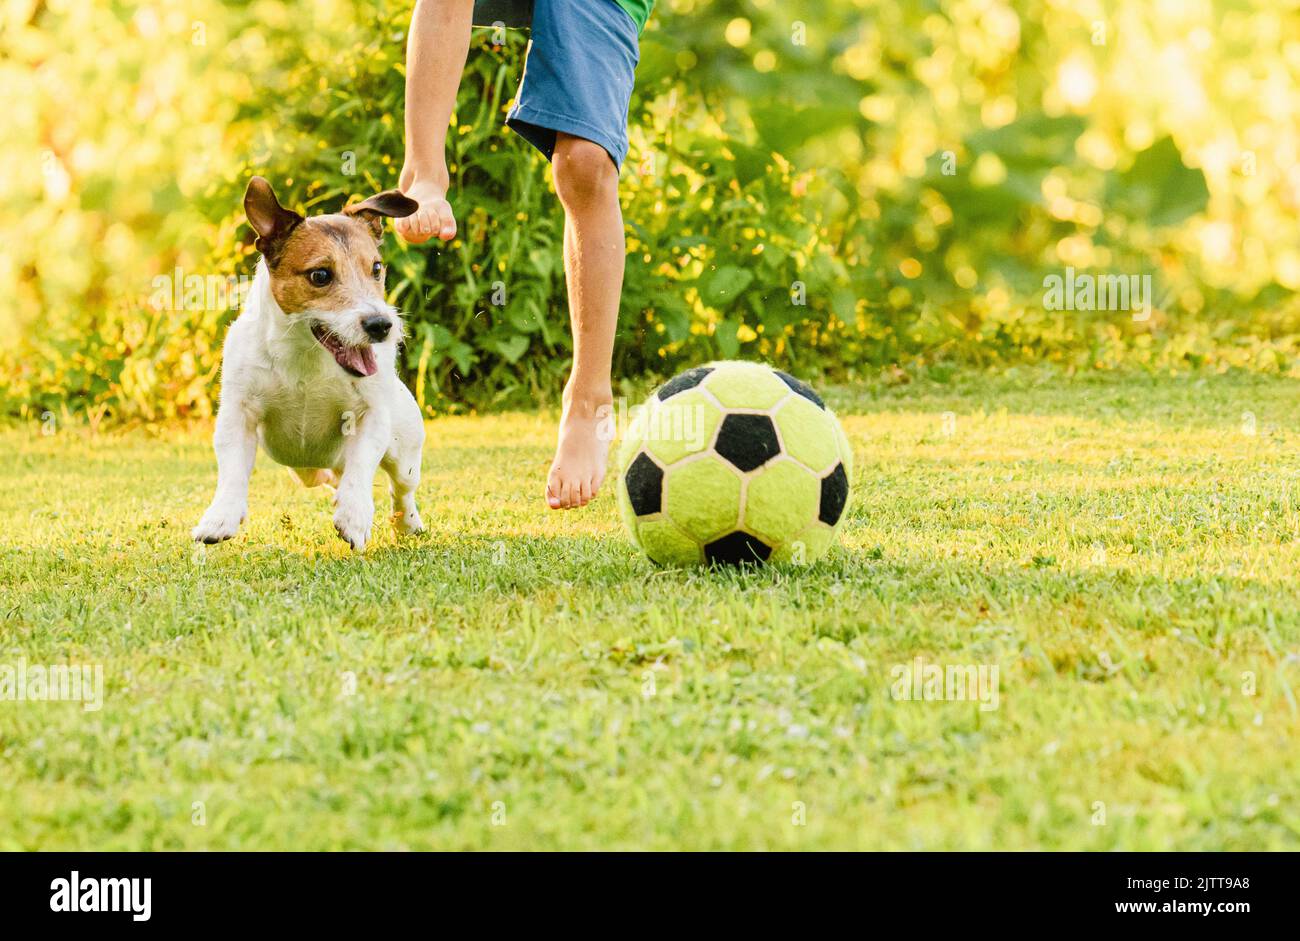 Family with dog playing football (soccer) recreationally at backyard lawn on sunny summer day Stock Photo